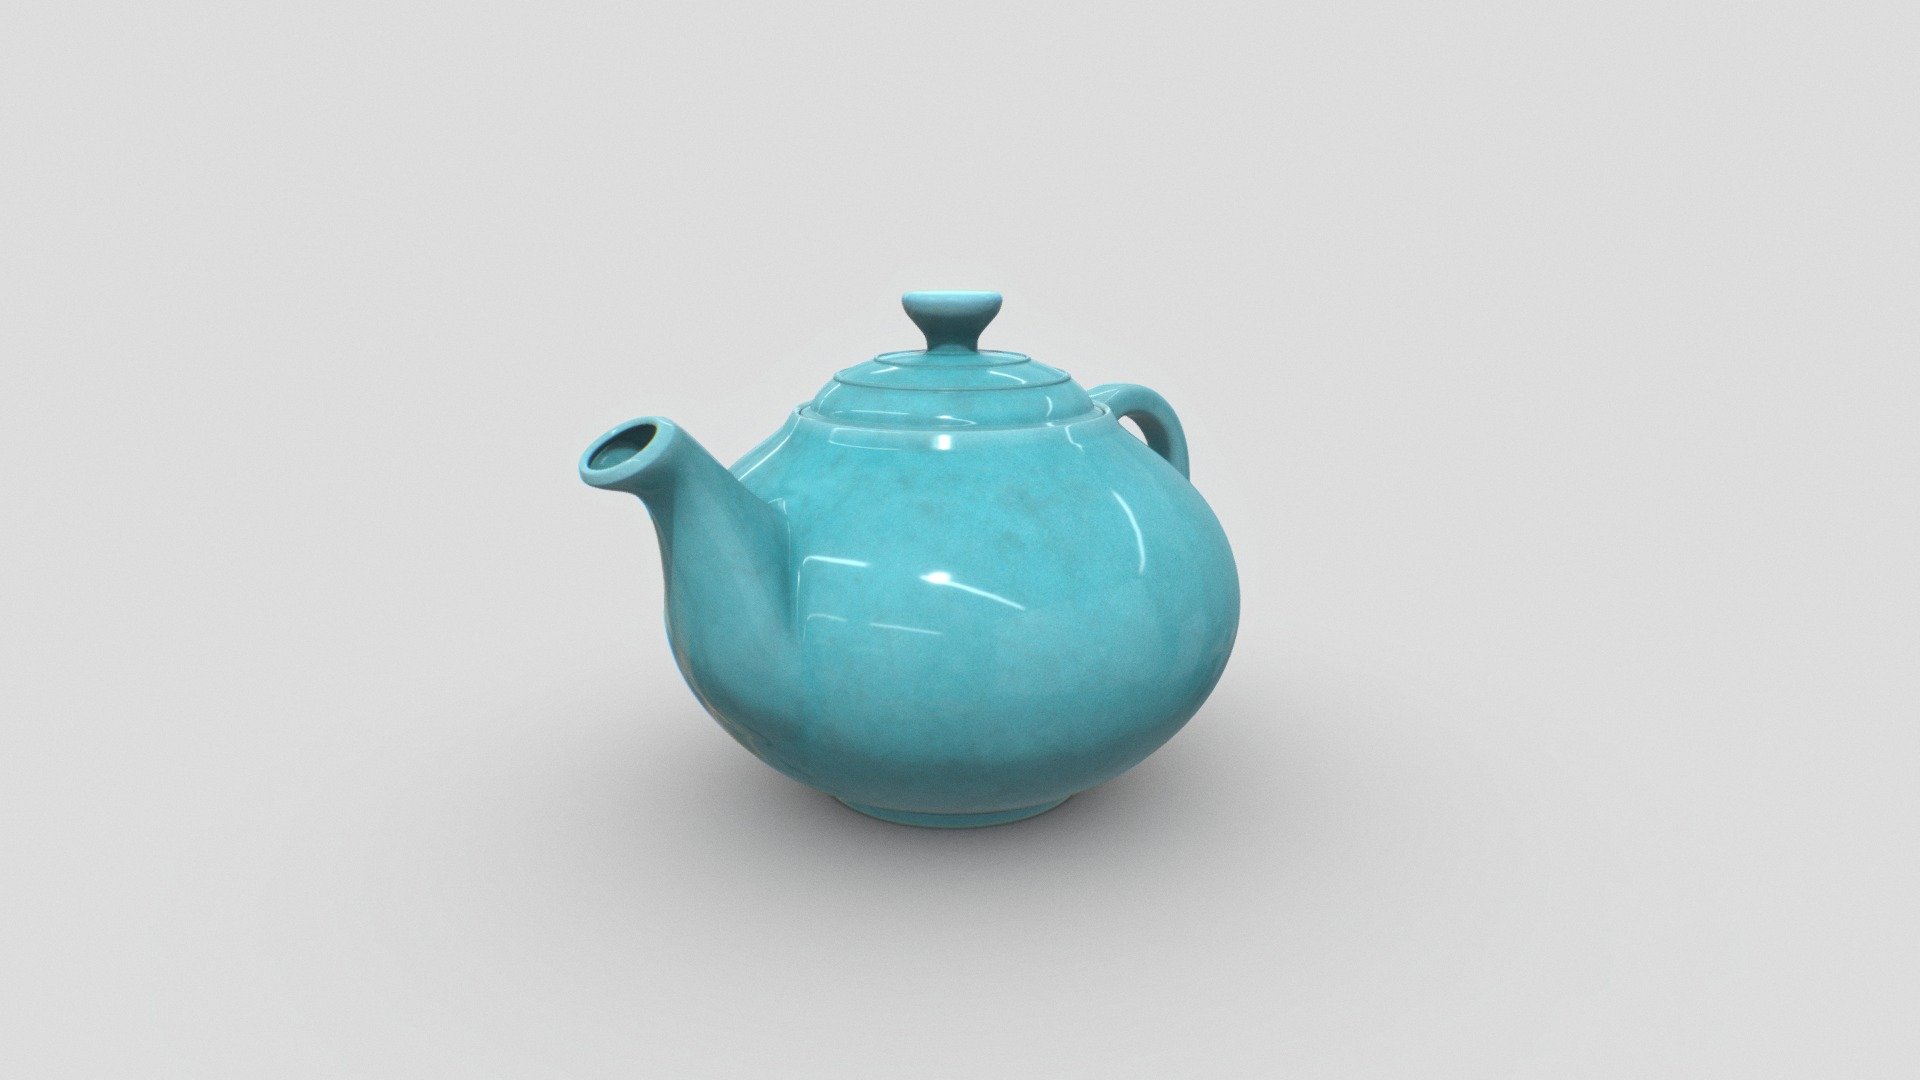 Le Creuset Traditional Teapot

This model I made it with Blender. I made it with actual size reference.
I include some file format (exported from Blender),texture, some sample render and also I include the lighting setup on the Blender file. 
Hopefully you enjoy it. 
Or, you can edit my model with your preferense easily.

Please like and share if you enjoy it 3d model